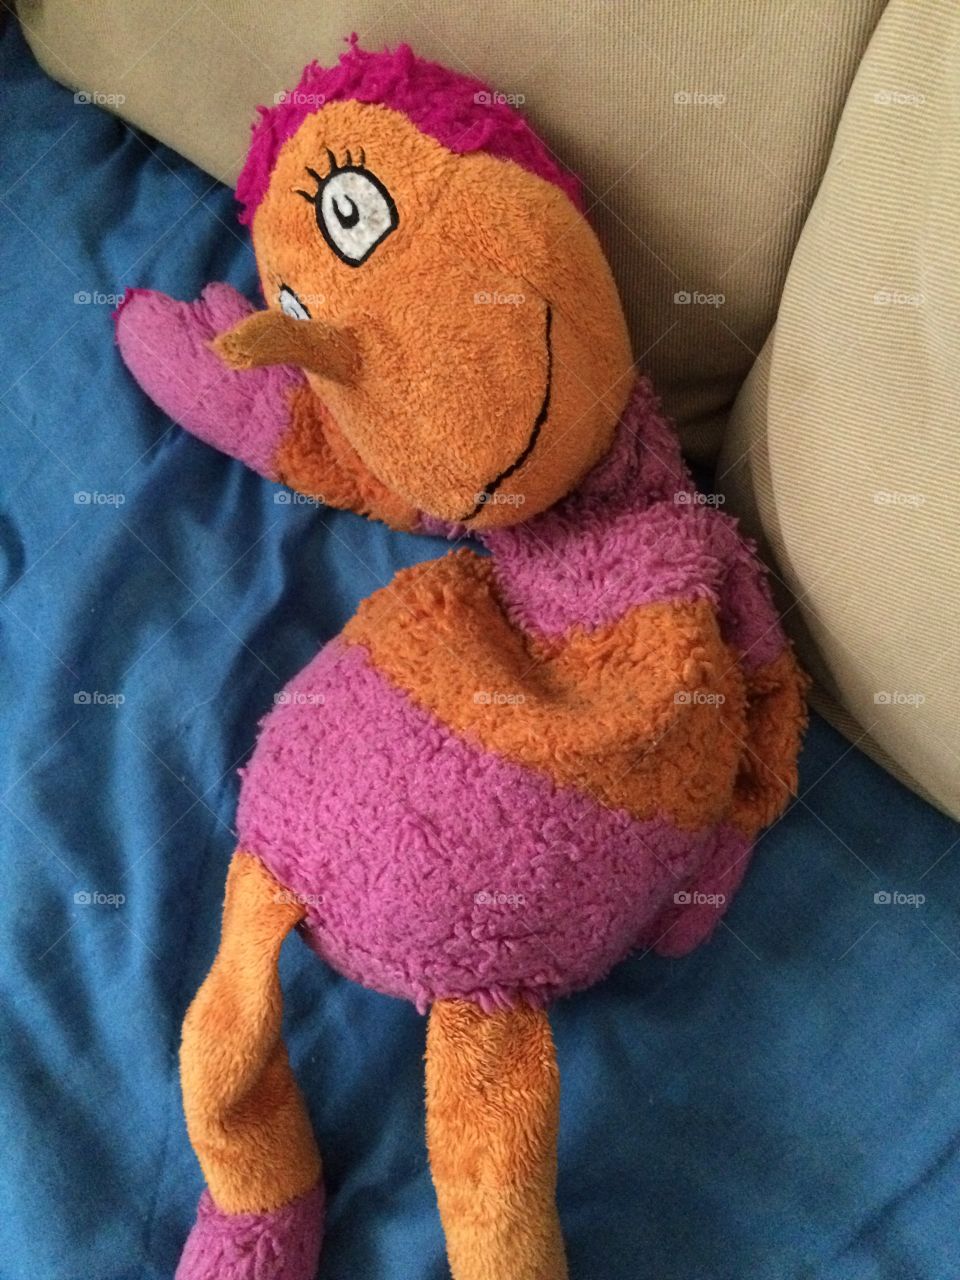 Well loved. My sons stuffed toy. He is well loved as you can see. He has had it for 3 years. 